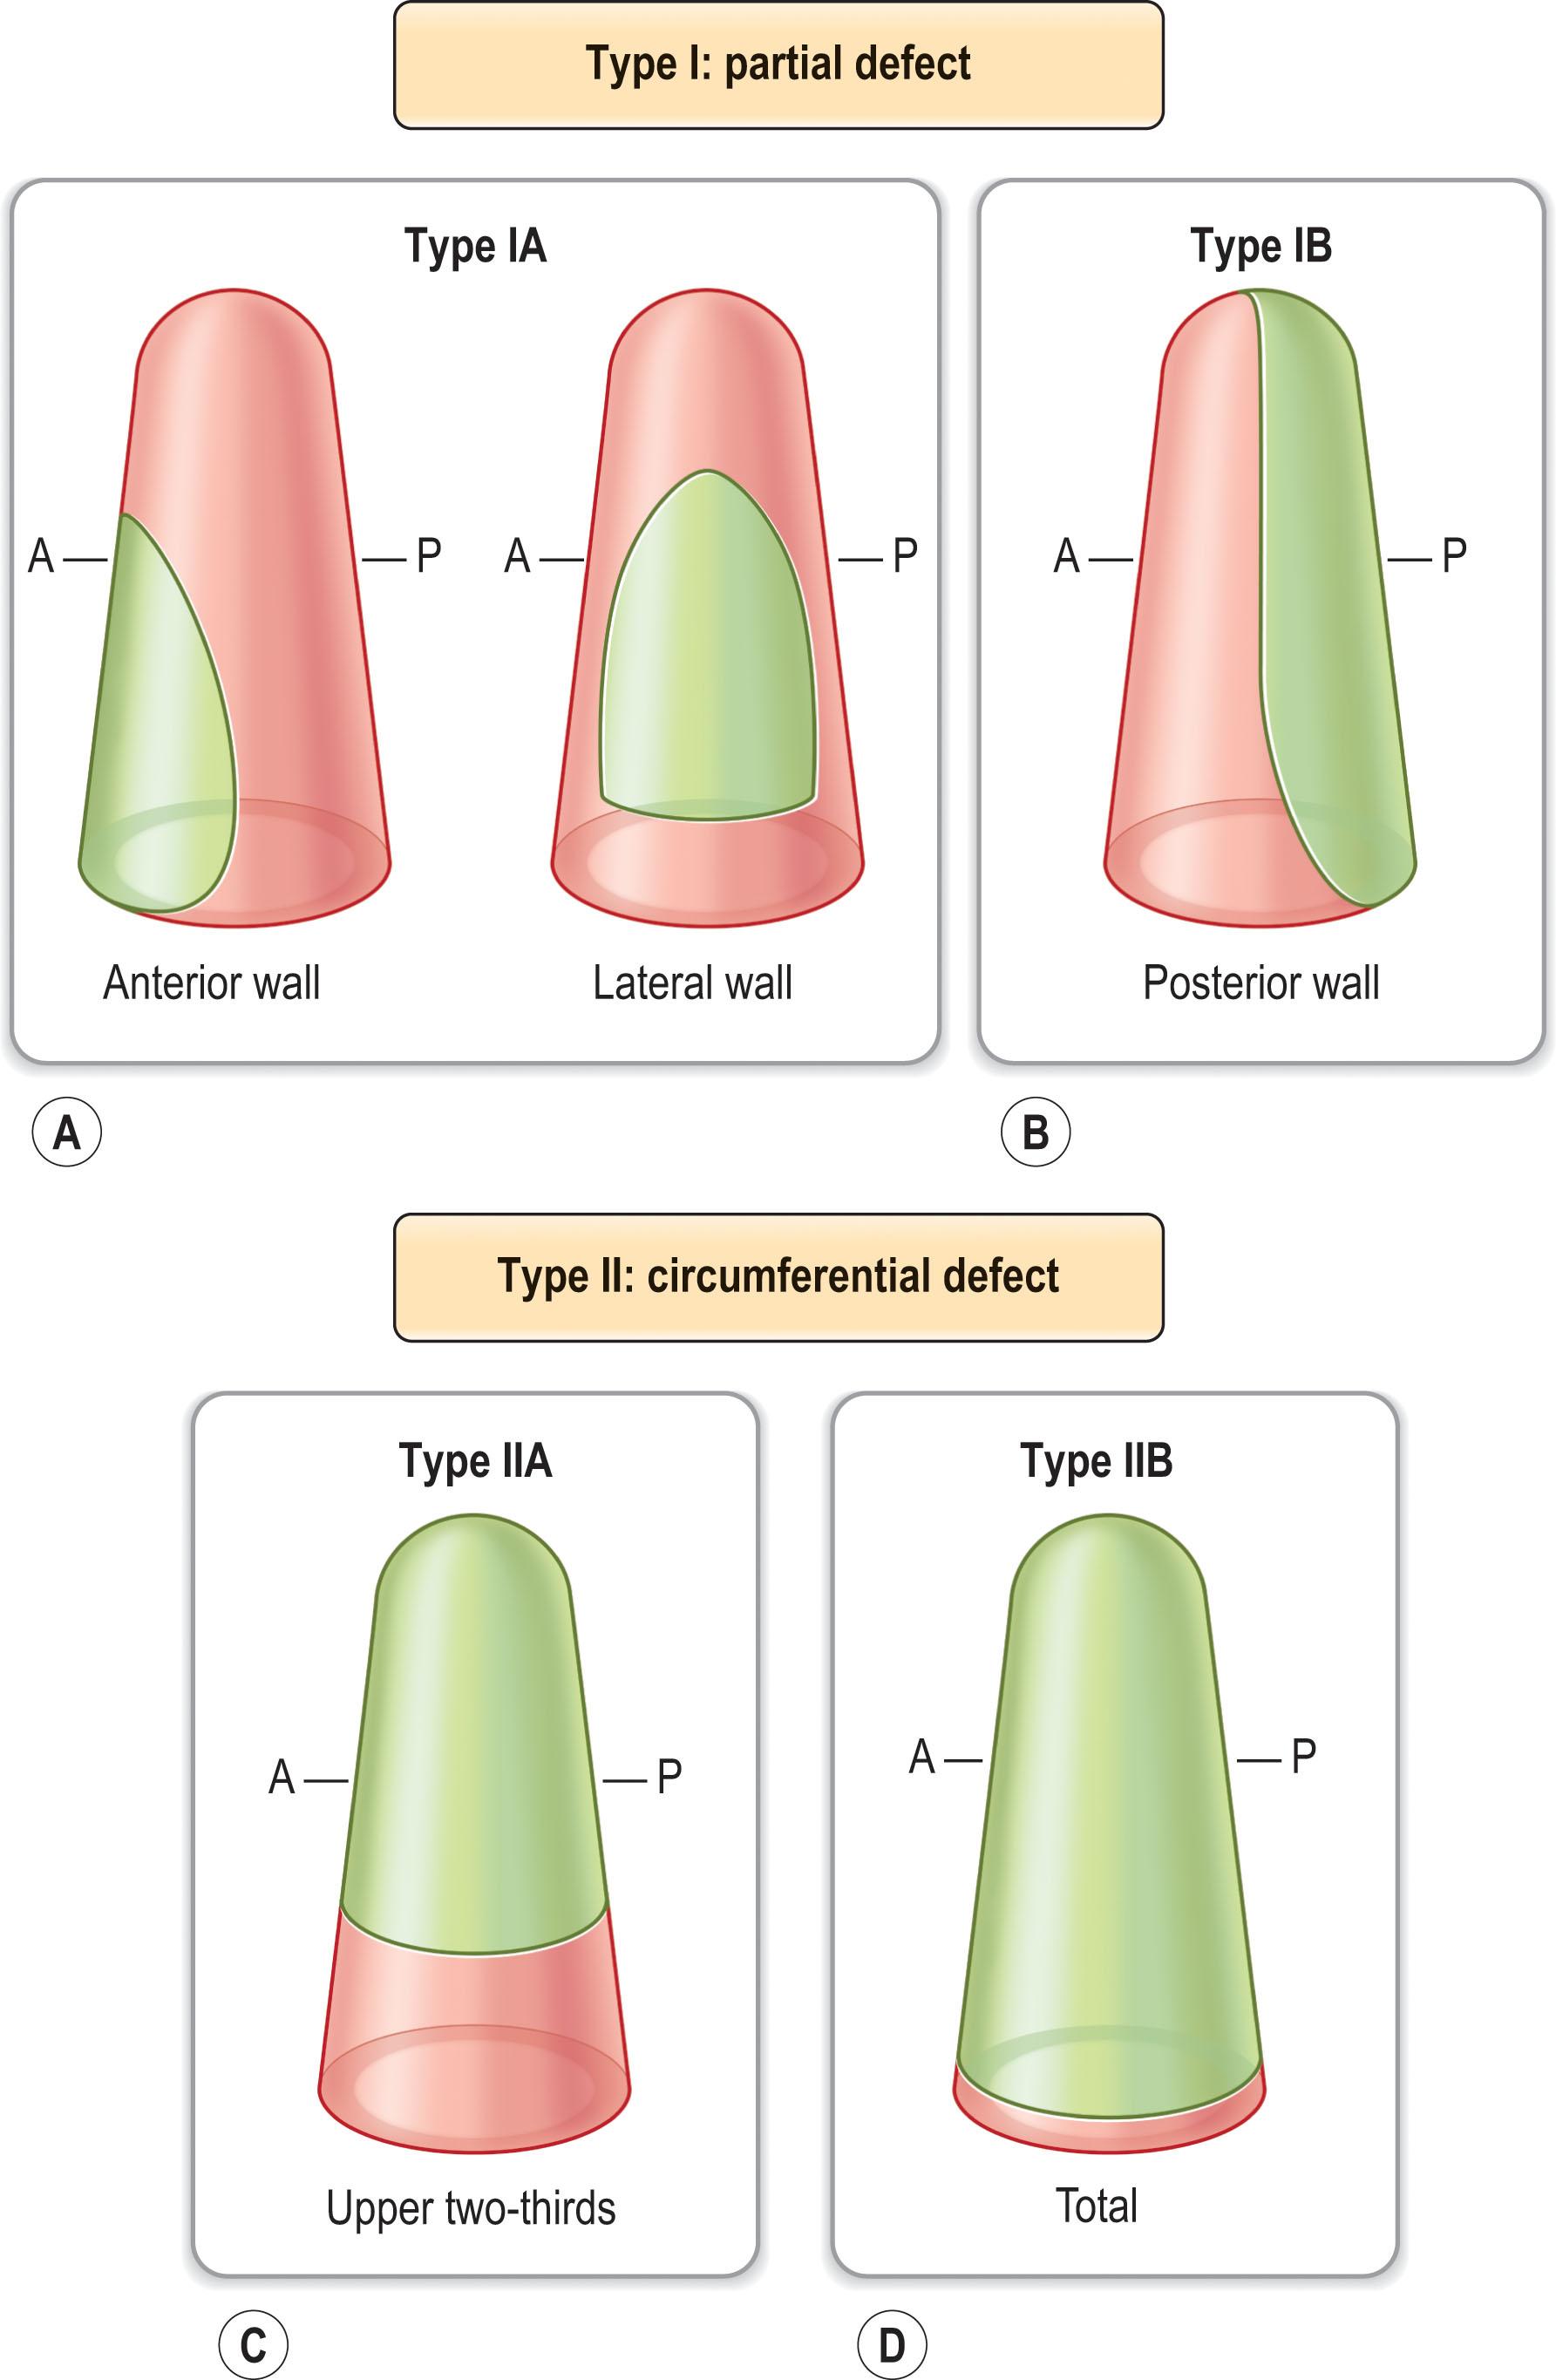 Figure 15.2, Classification system of acquired vaginal defects. (A,B) Type I: partial defect. (A) Type IA: partial defect of the anterior or lateral wall. (B) Type IIB: partial defect of the posterior wall. (C,D) Type II: circumferential defect. (C) Type IIA: circumferential defect of the upper two-thirds. (D) Type IIB: circumferential, total defect. A, anterior; P, posterior.